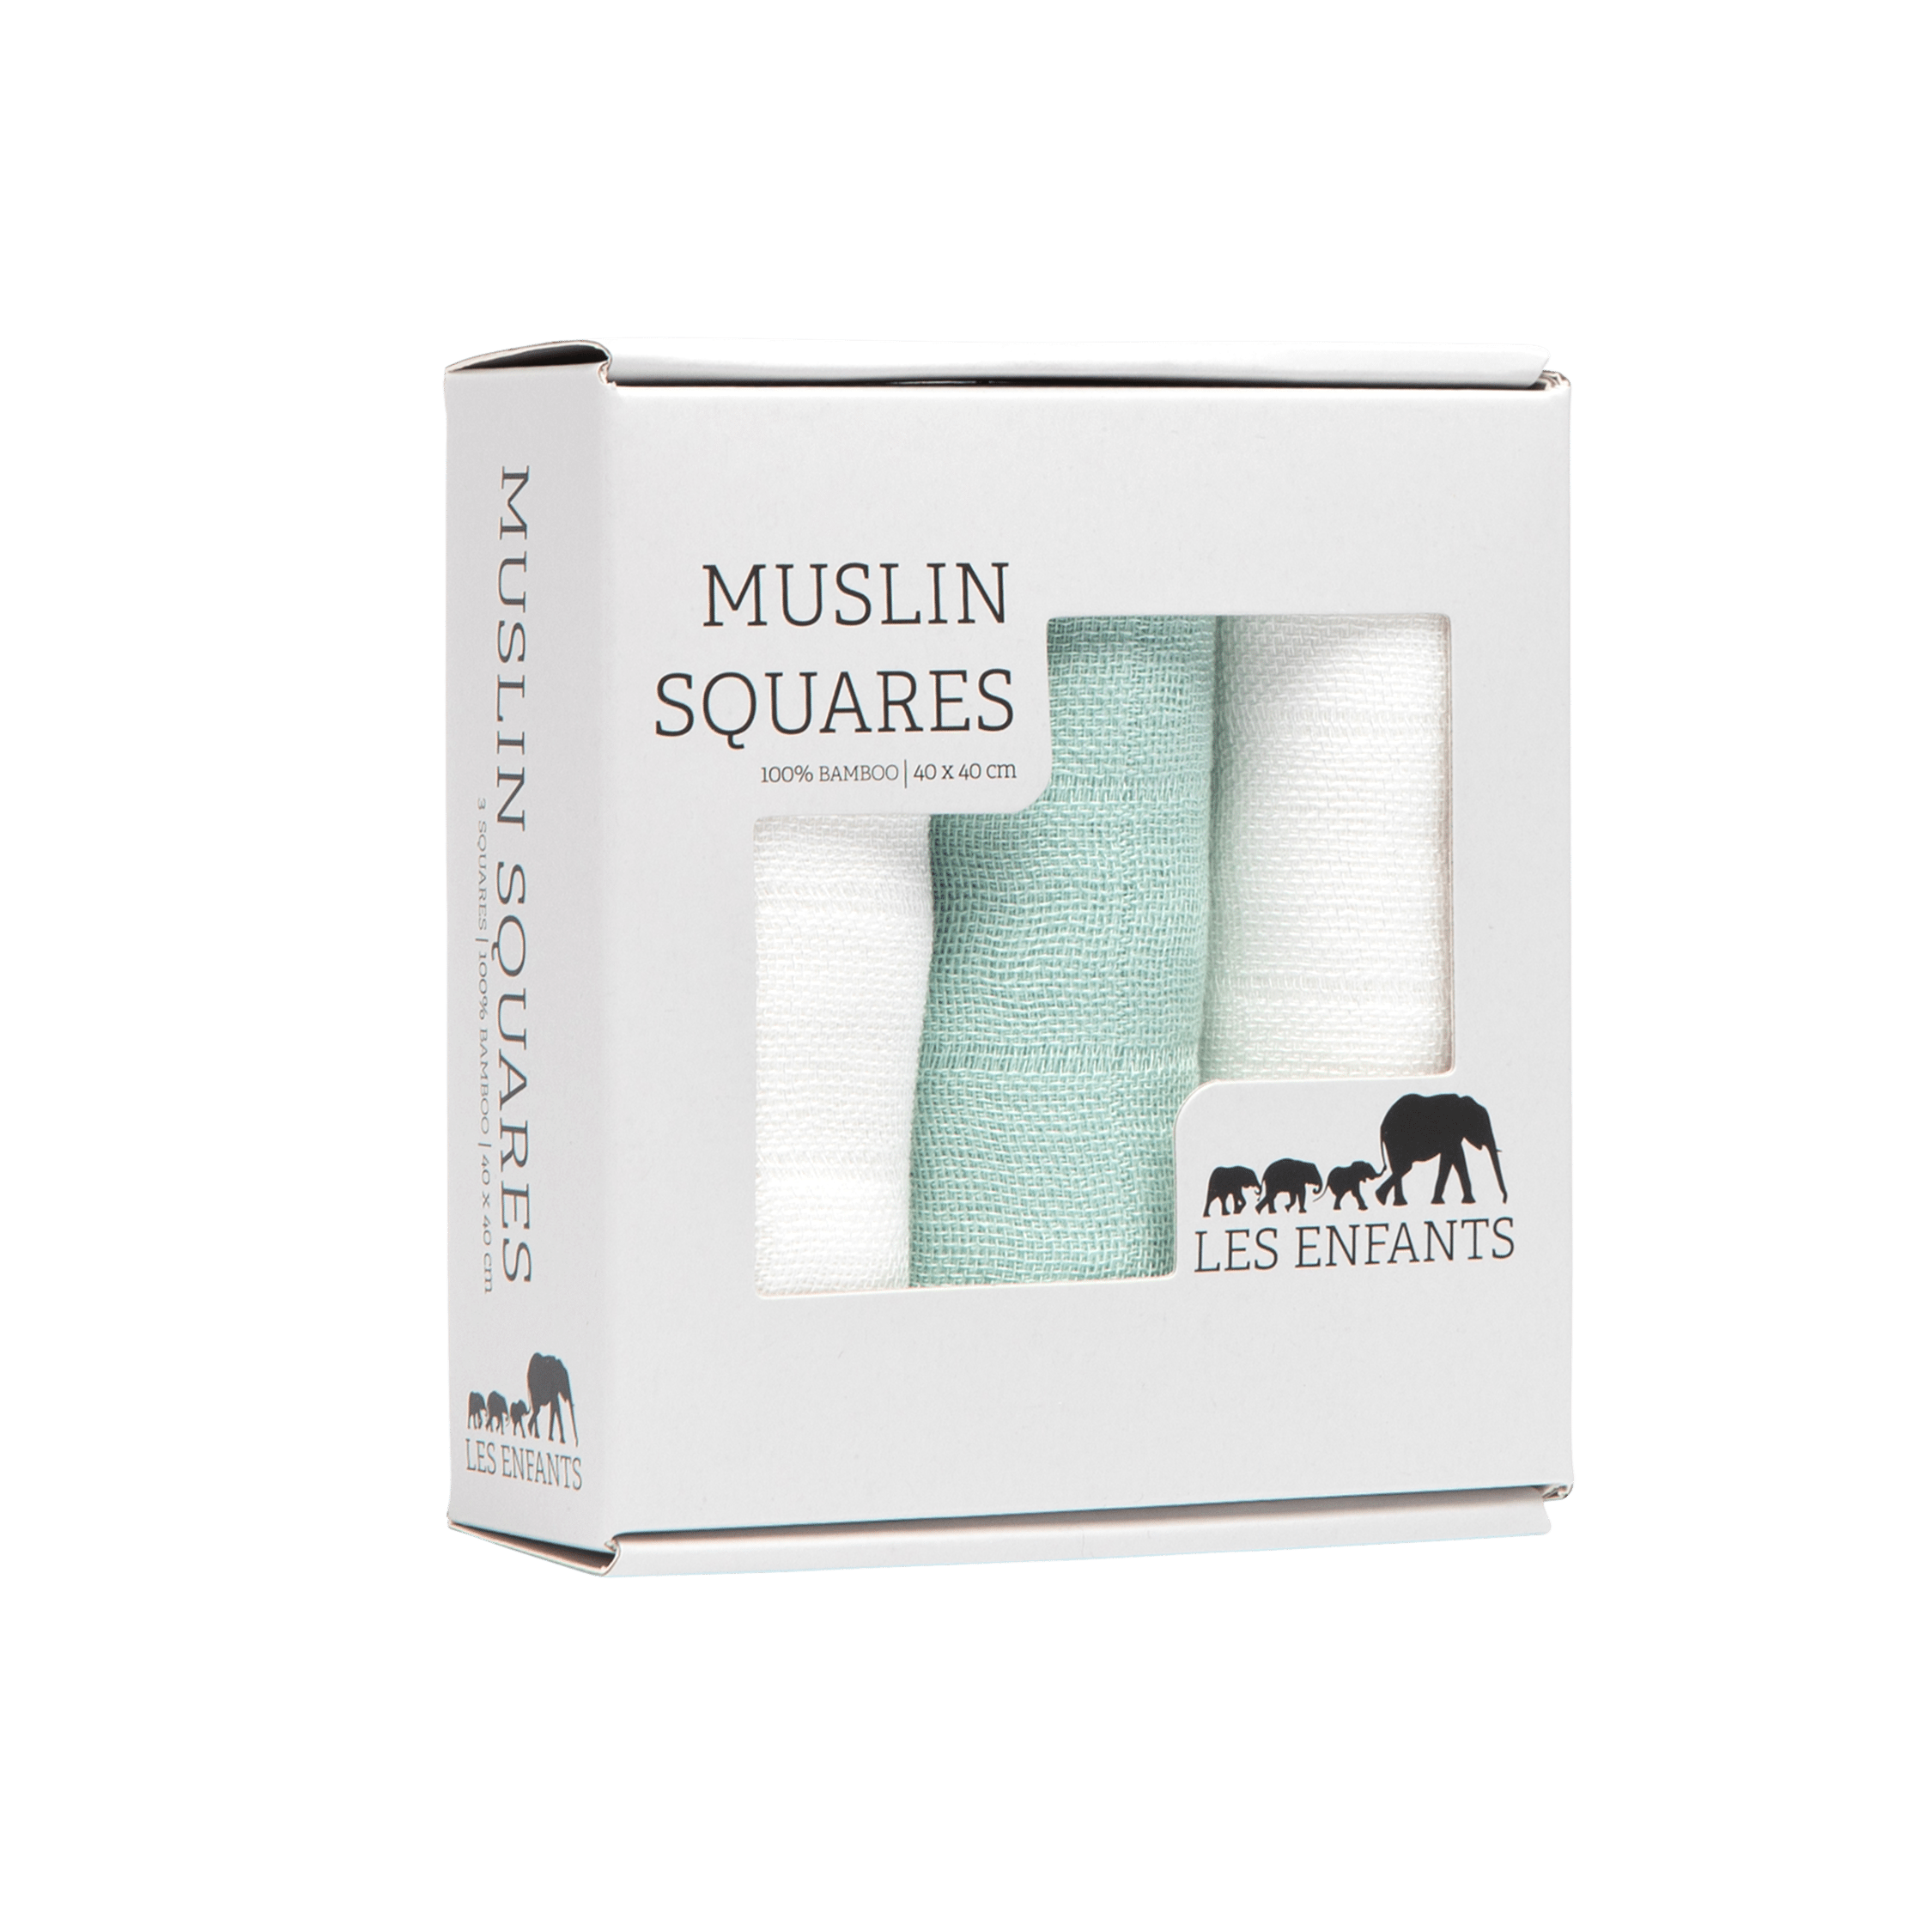 Muslin Squares Green / White